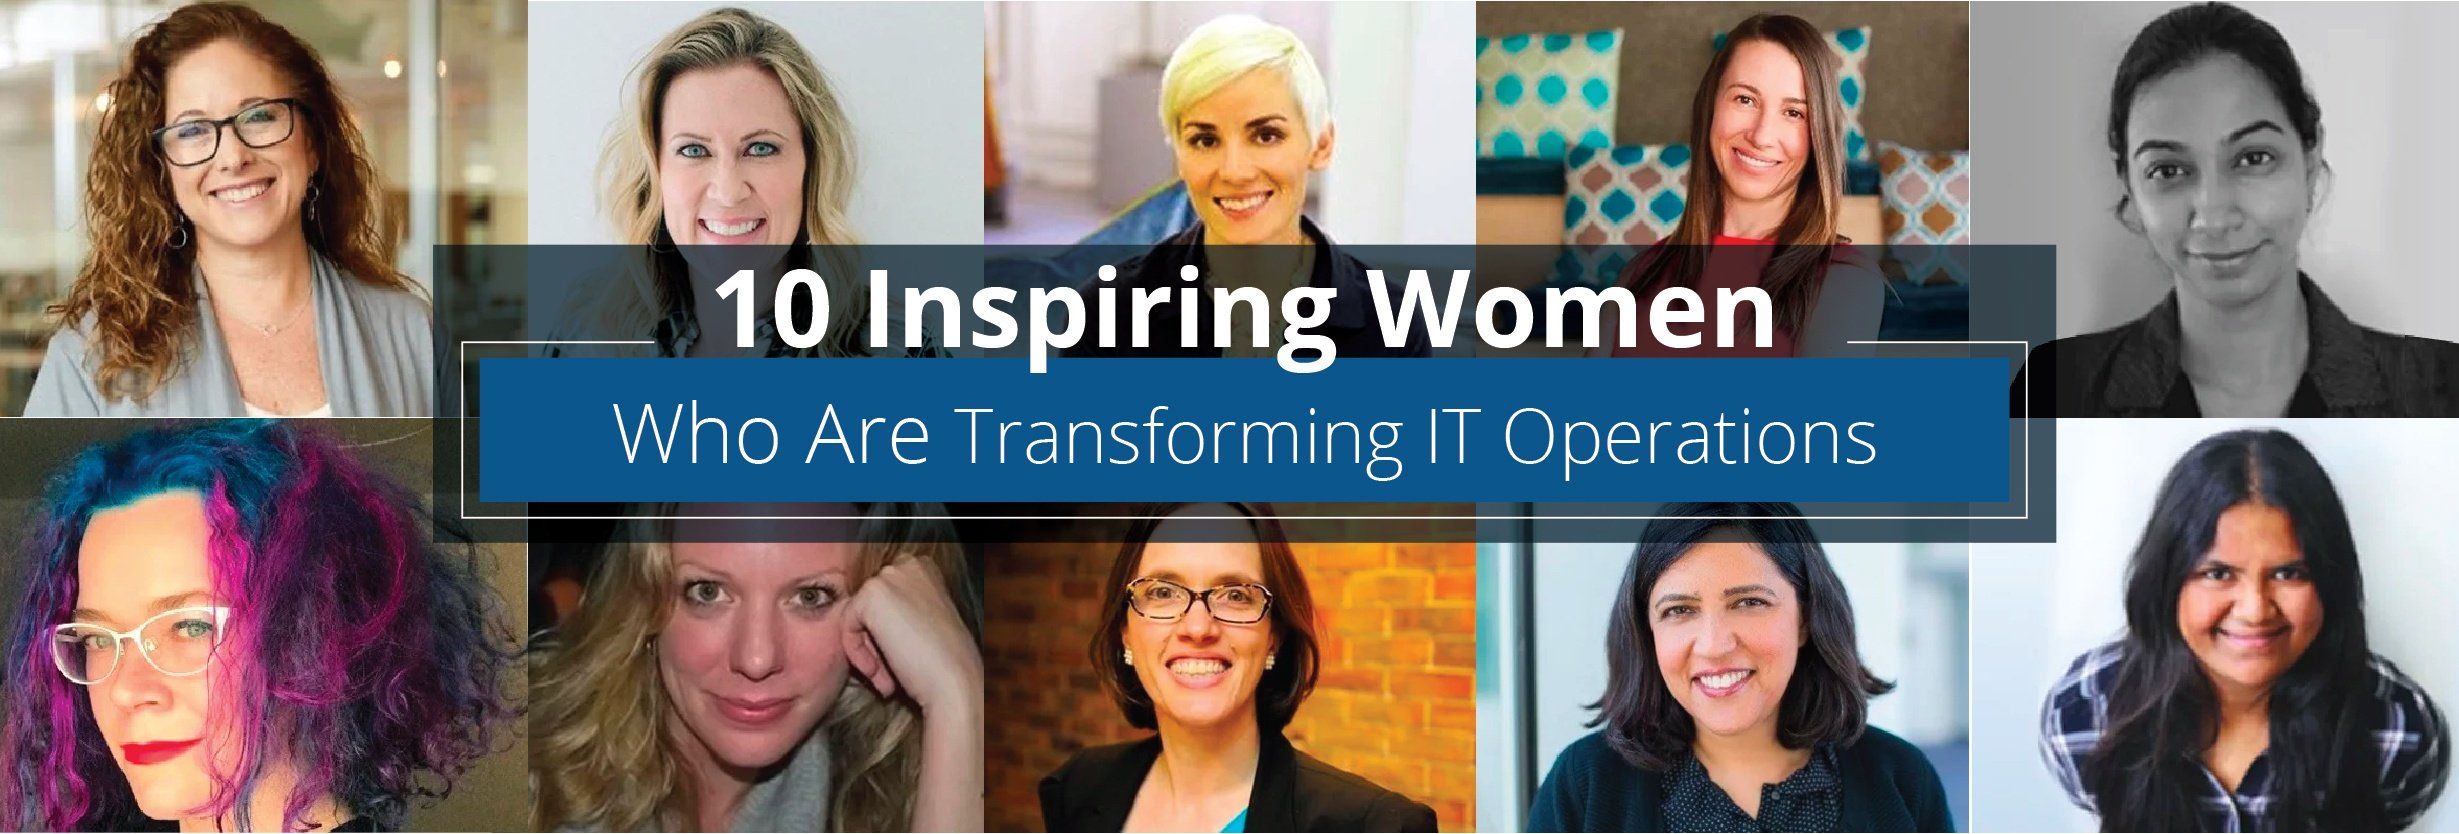 10 Inspiring Women Who Are Transforming The World of IT Ops/DevOps/SRE For The Better